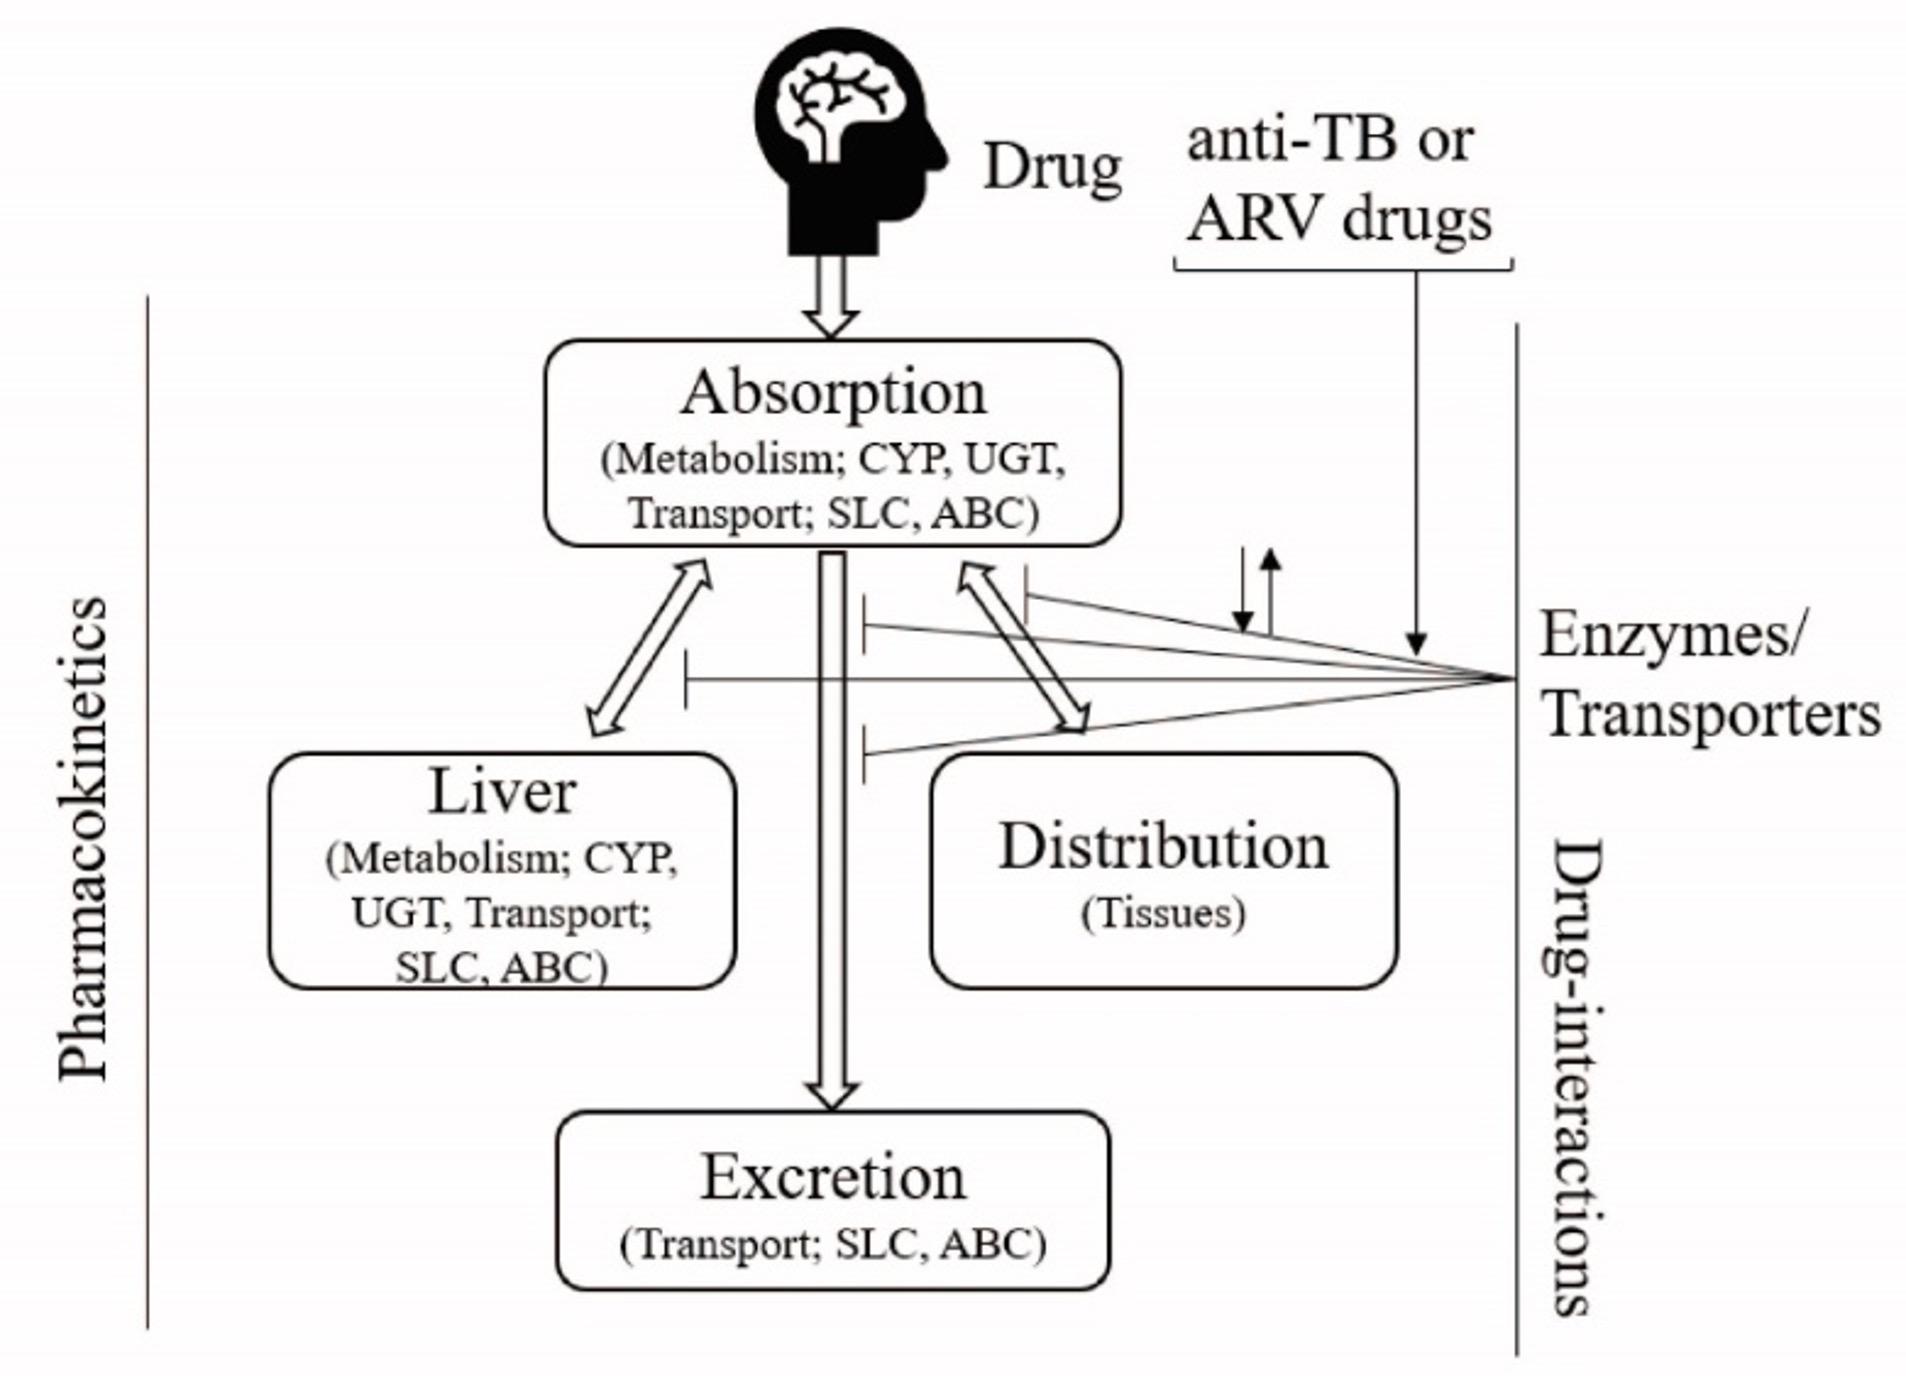 Role of drug metabolic enzymes and transporters in drug-drug interactions between antiretroviral and antituberculosis drugs